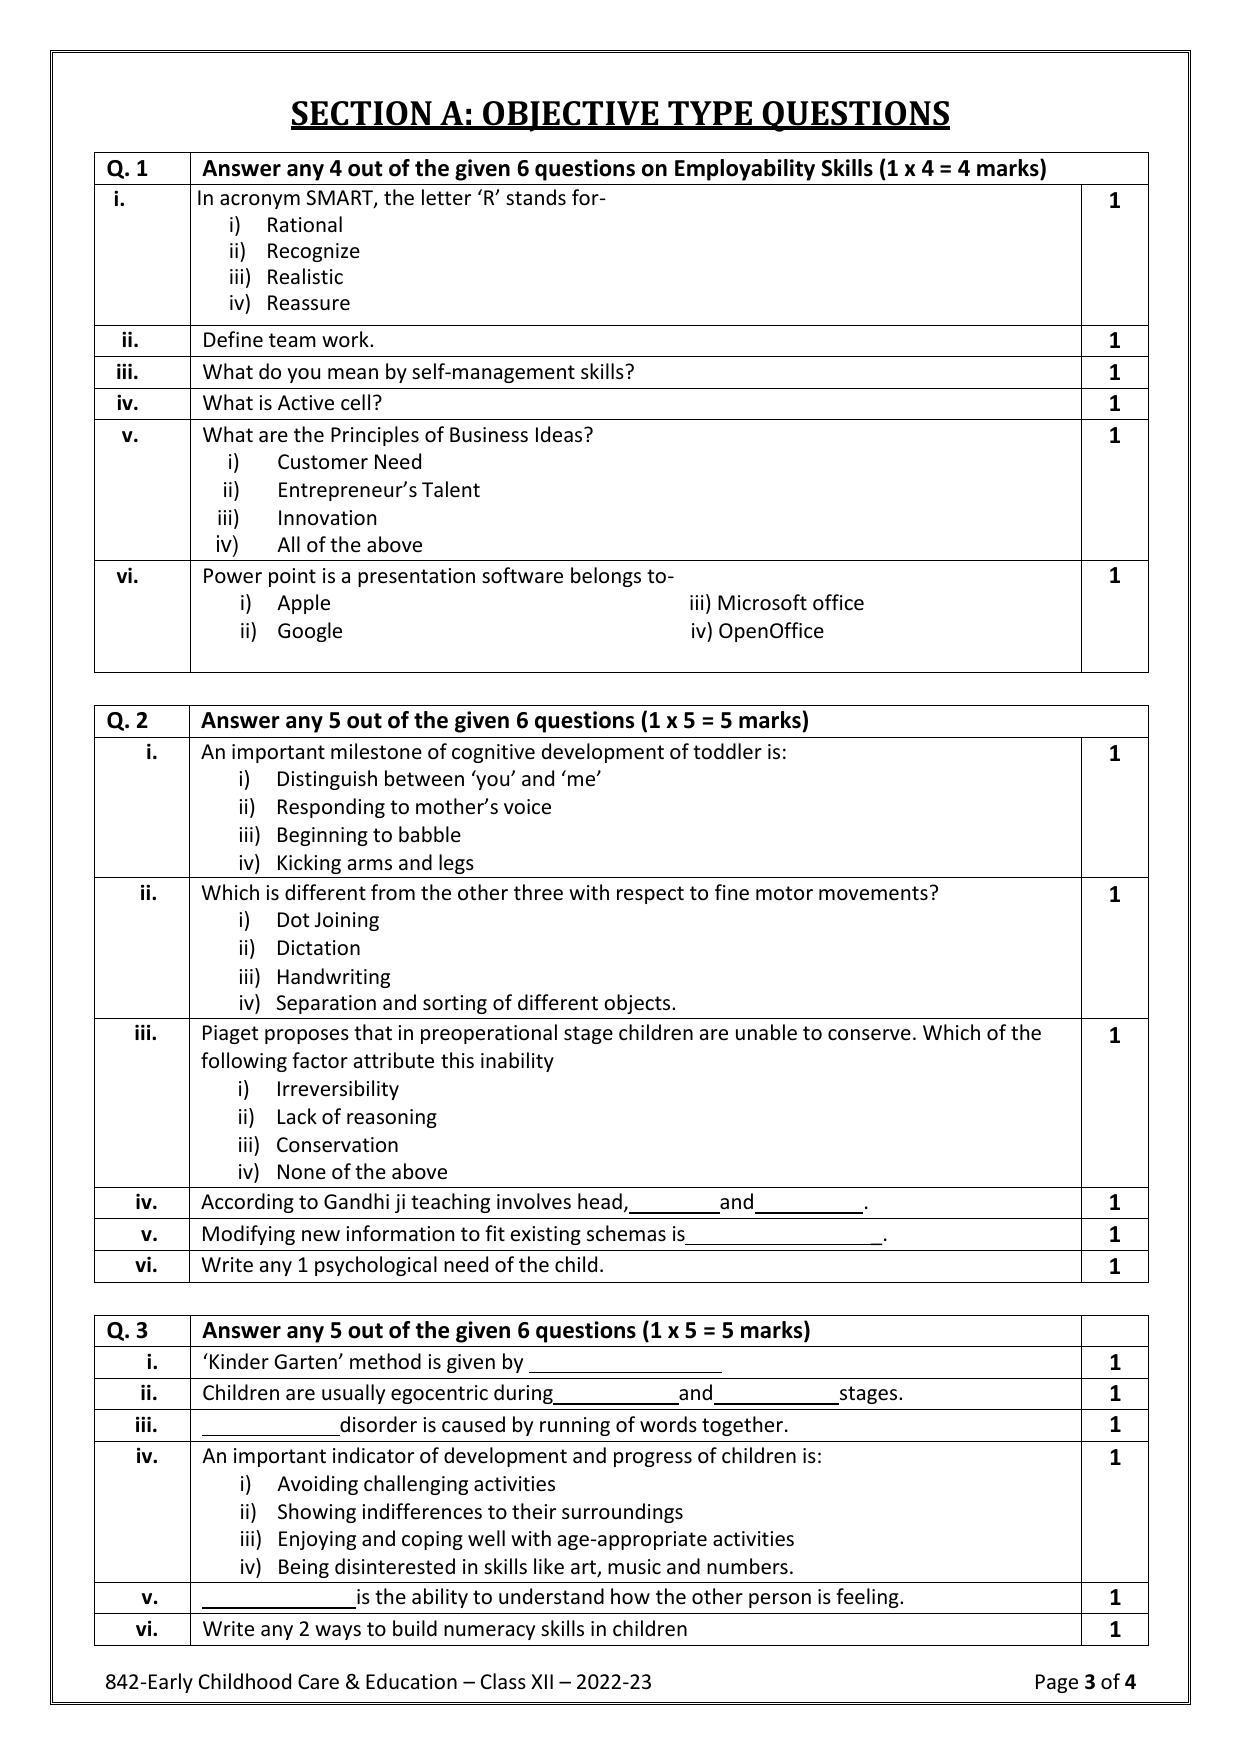 CBSE Class 10 Early Childhood Care & Education (Skill Education) Sample Papers 2023 - Page 3